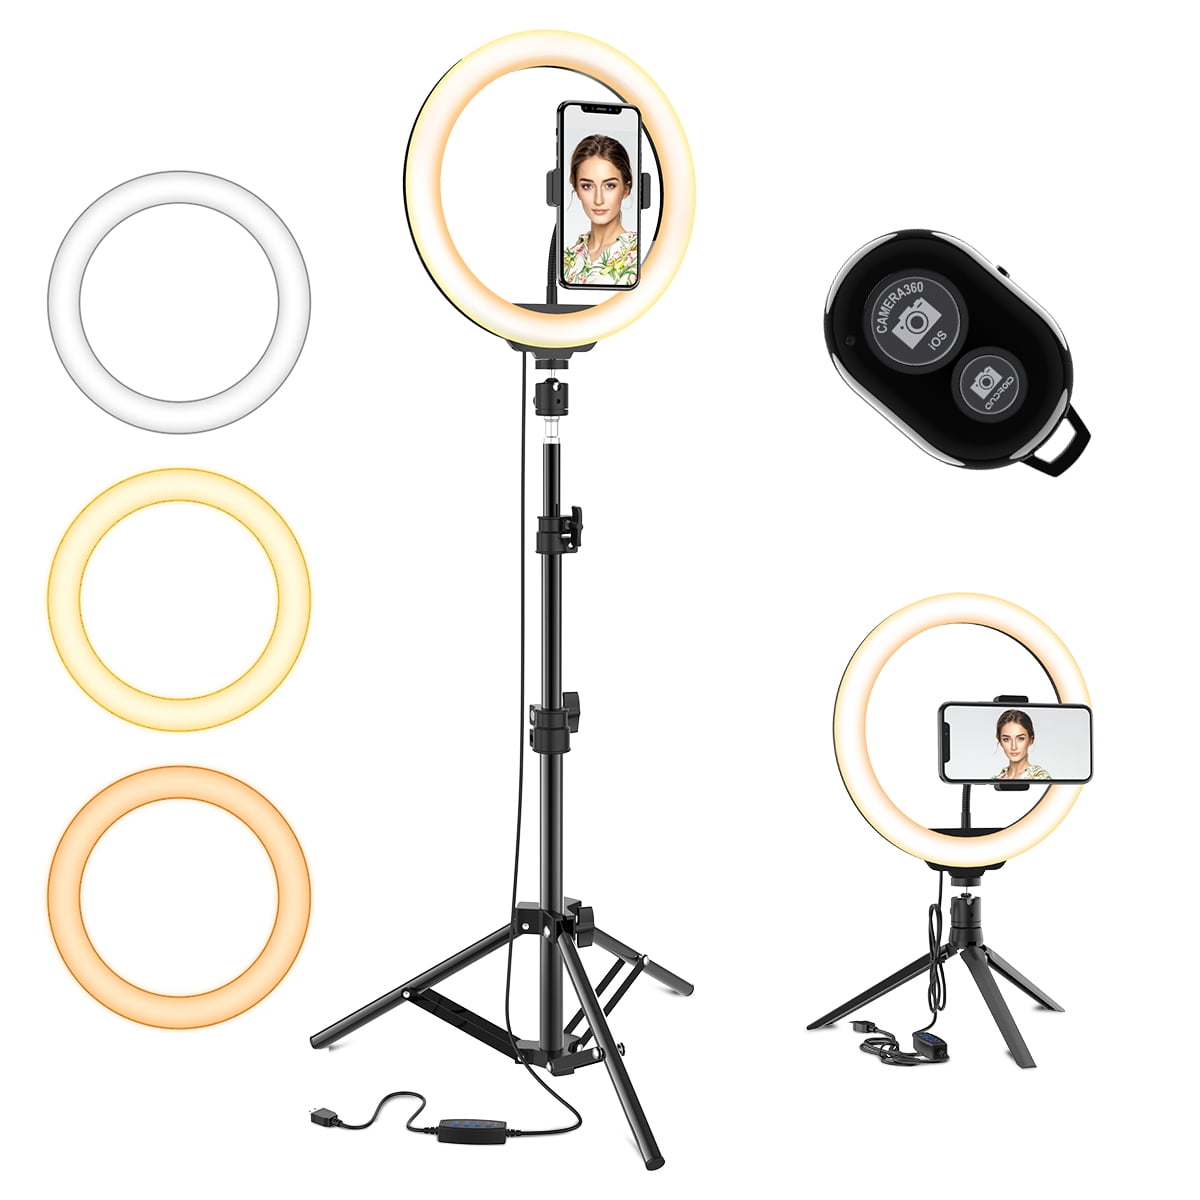 KEYUTE 10 Selfie Ring Light Desktop Beauty Make up Ring Light with Mirror for YouTube Video Live Steaming Dimmable RGB LED Ring Light with Tripod Stand and Cell Phone Holder for Vlog